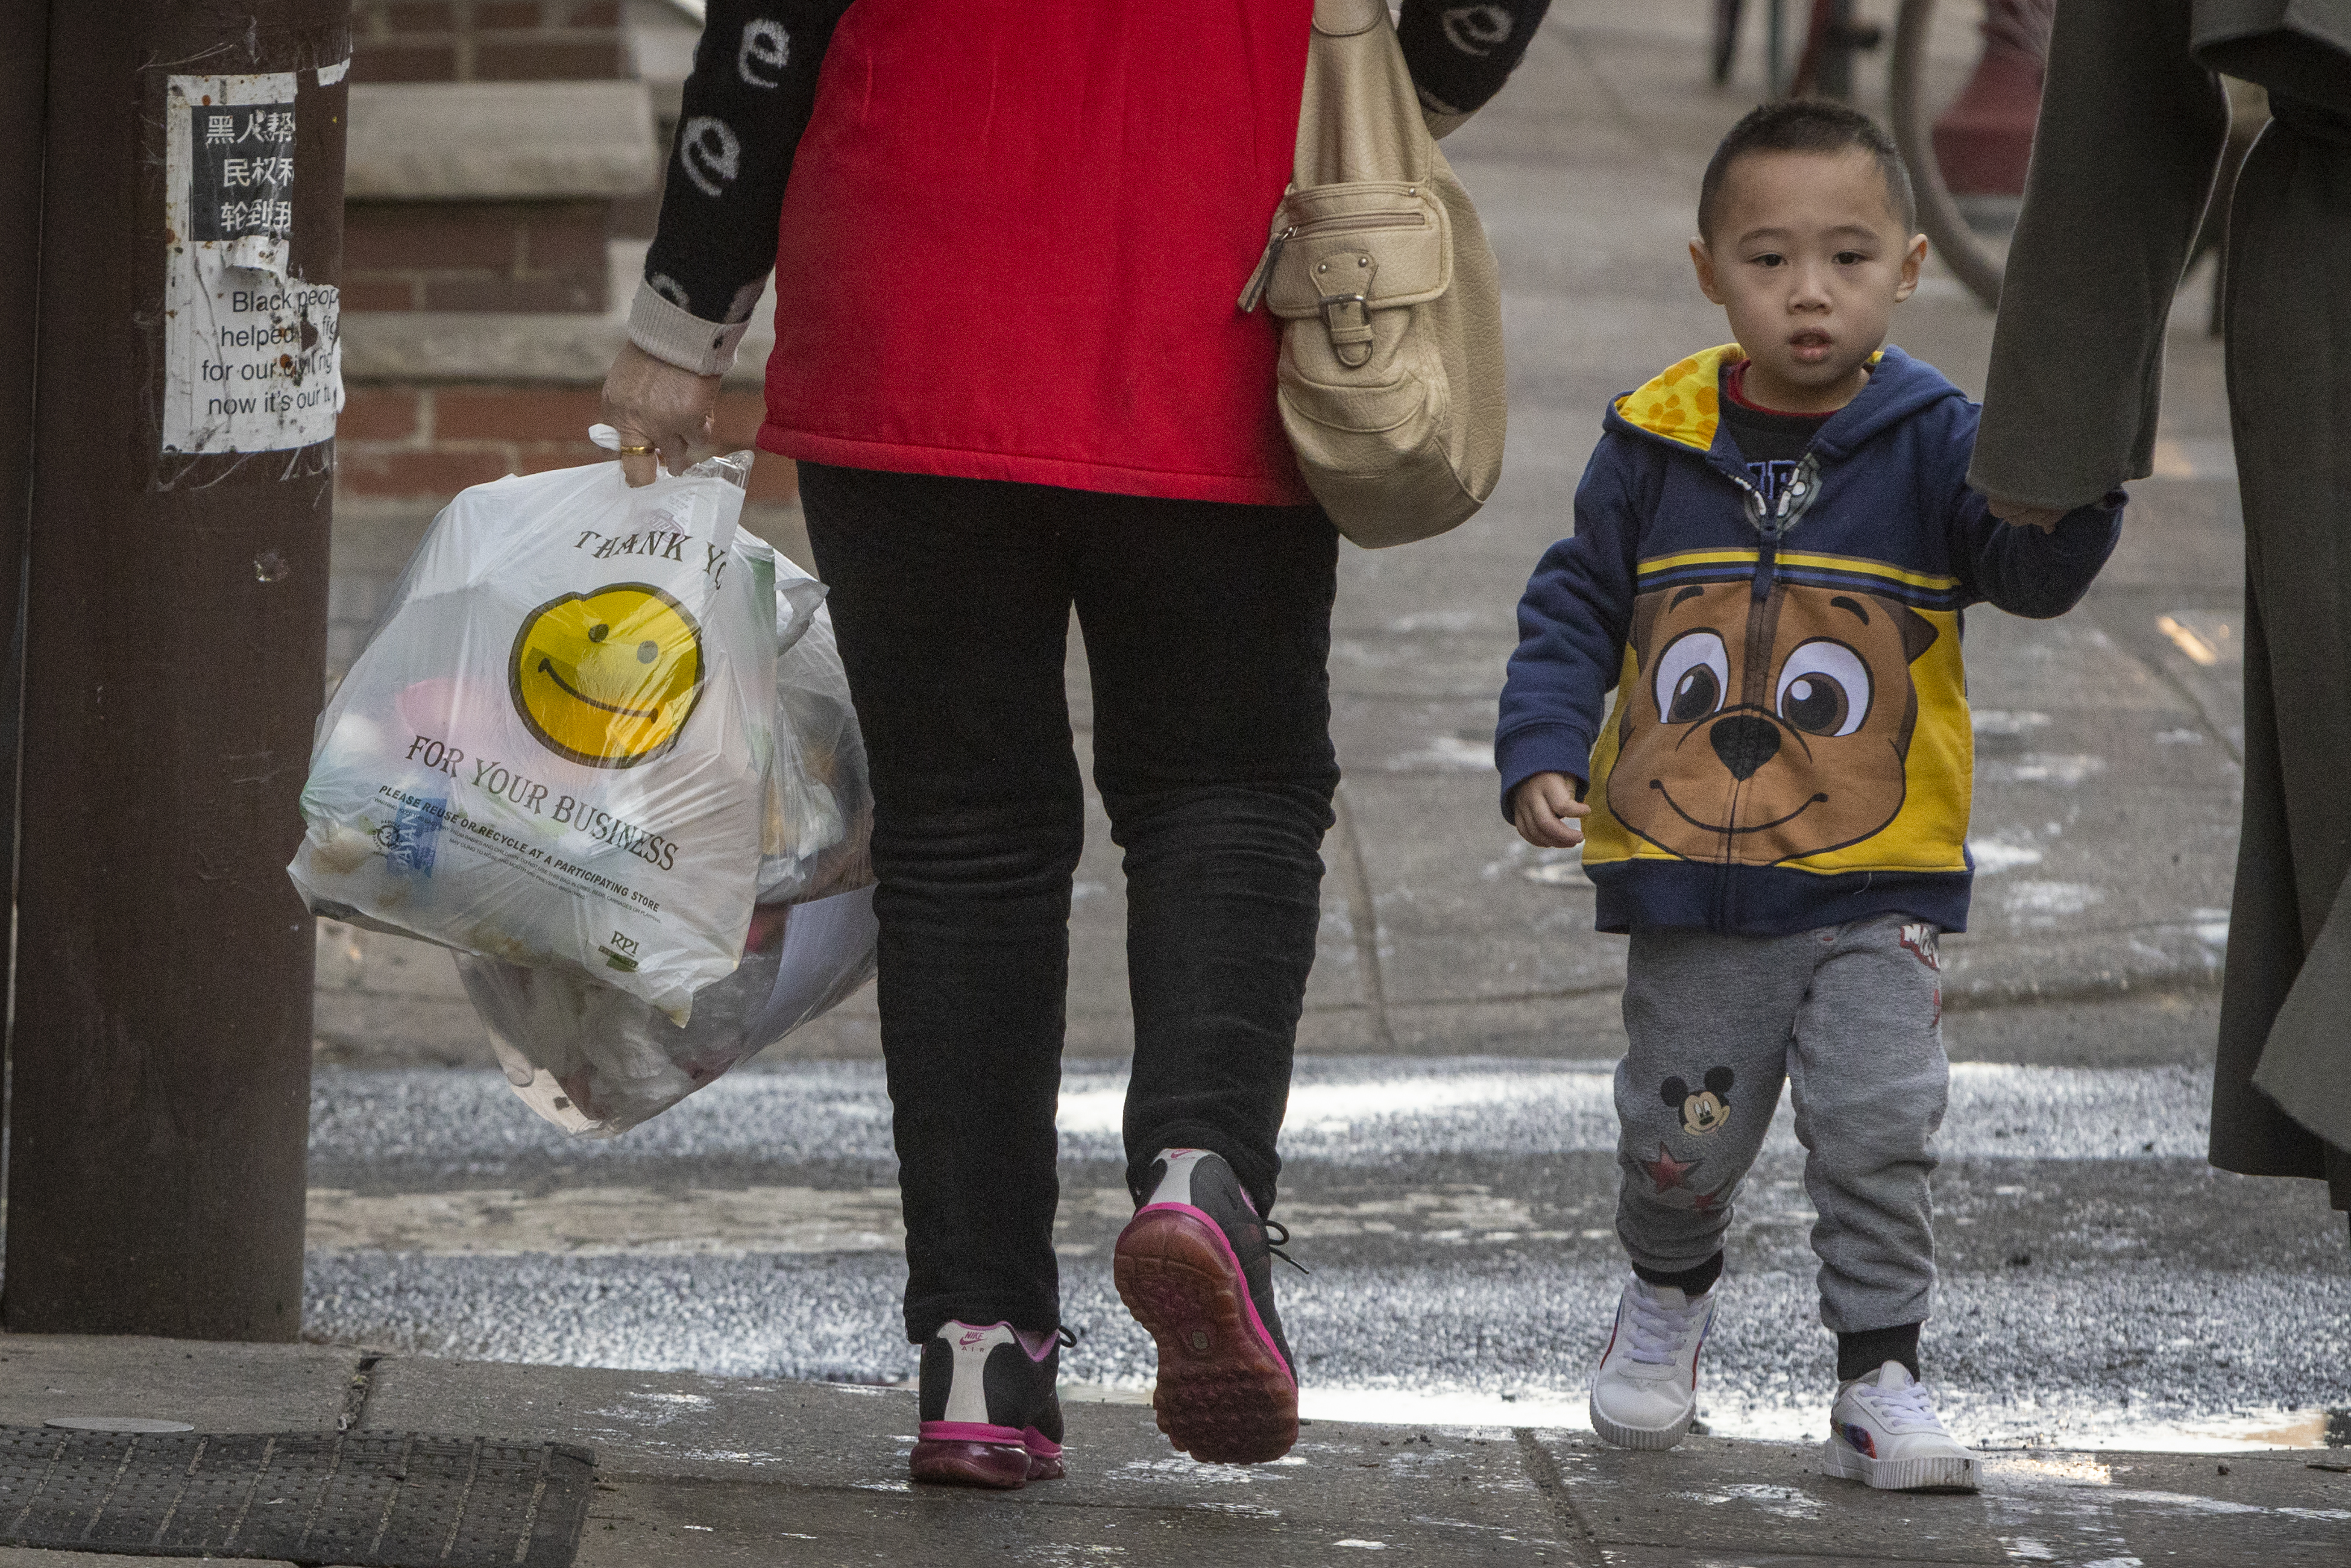 Plastic bag bans have already prevented billions of bags from being used,  report finds